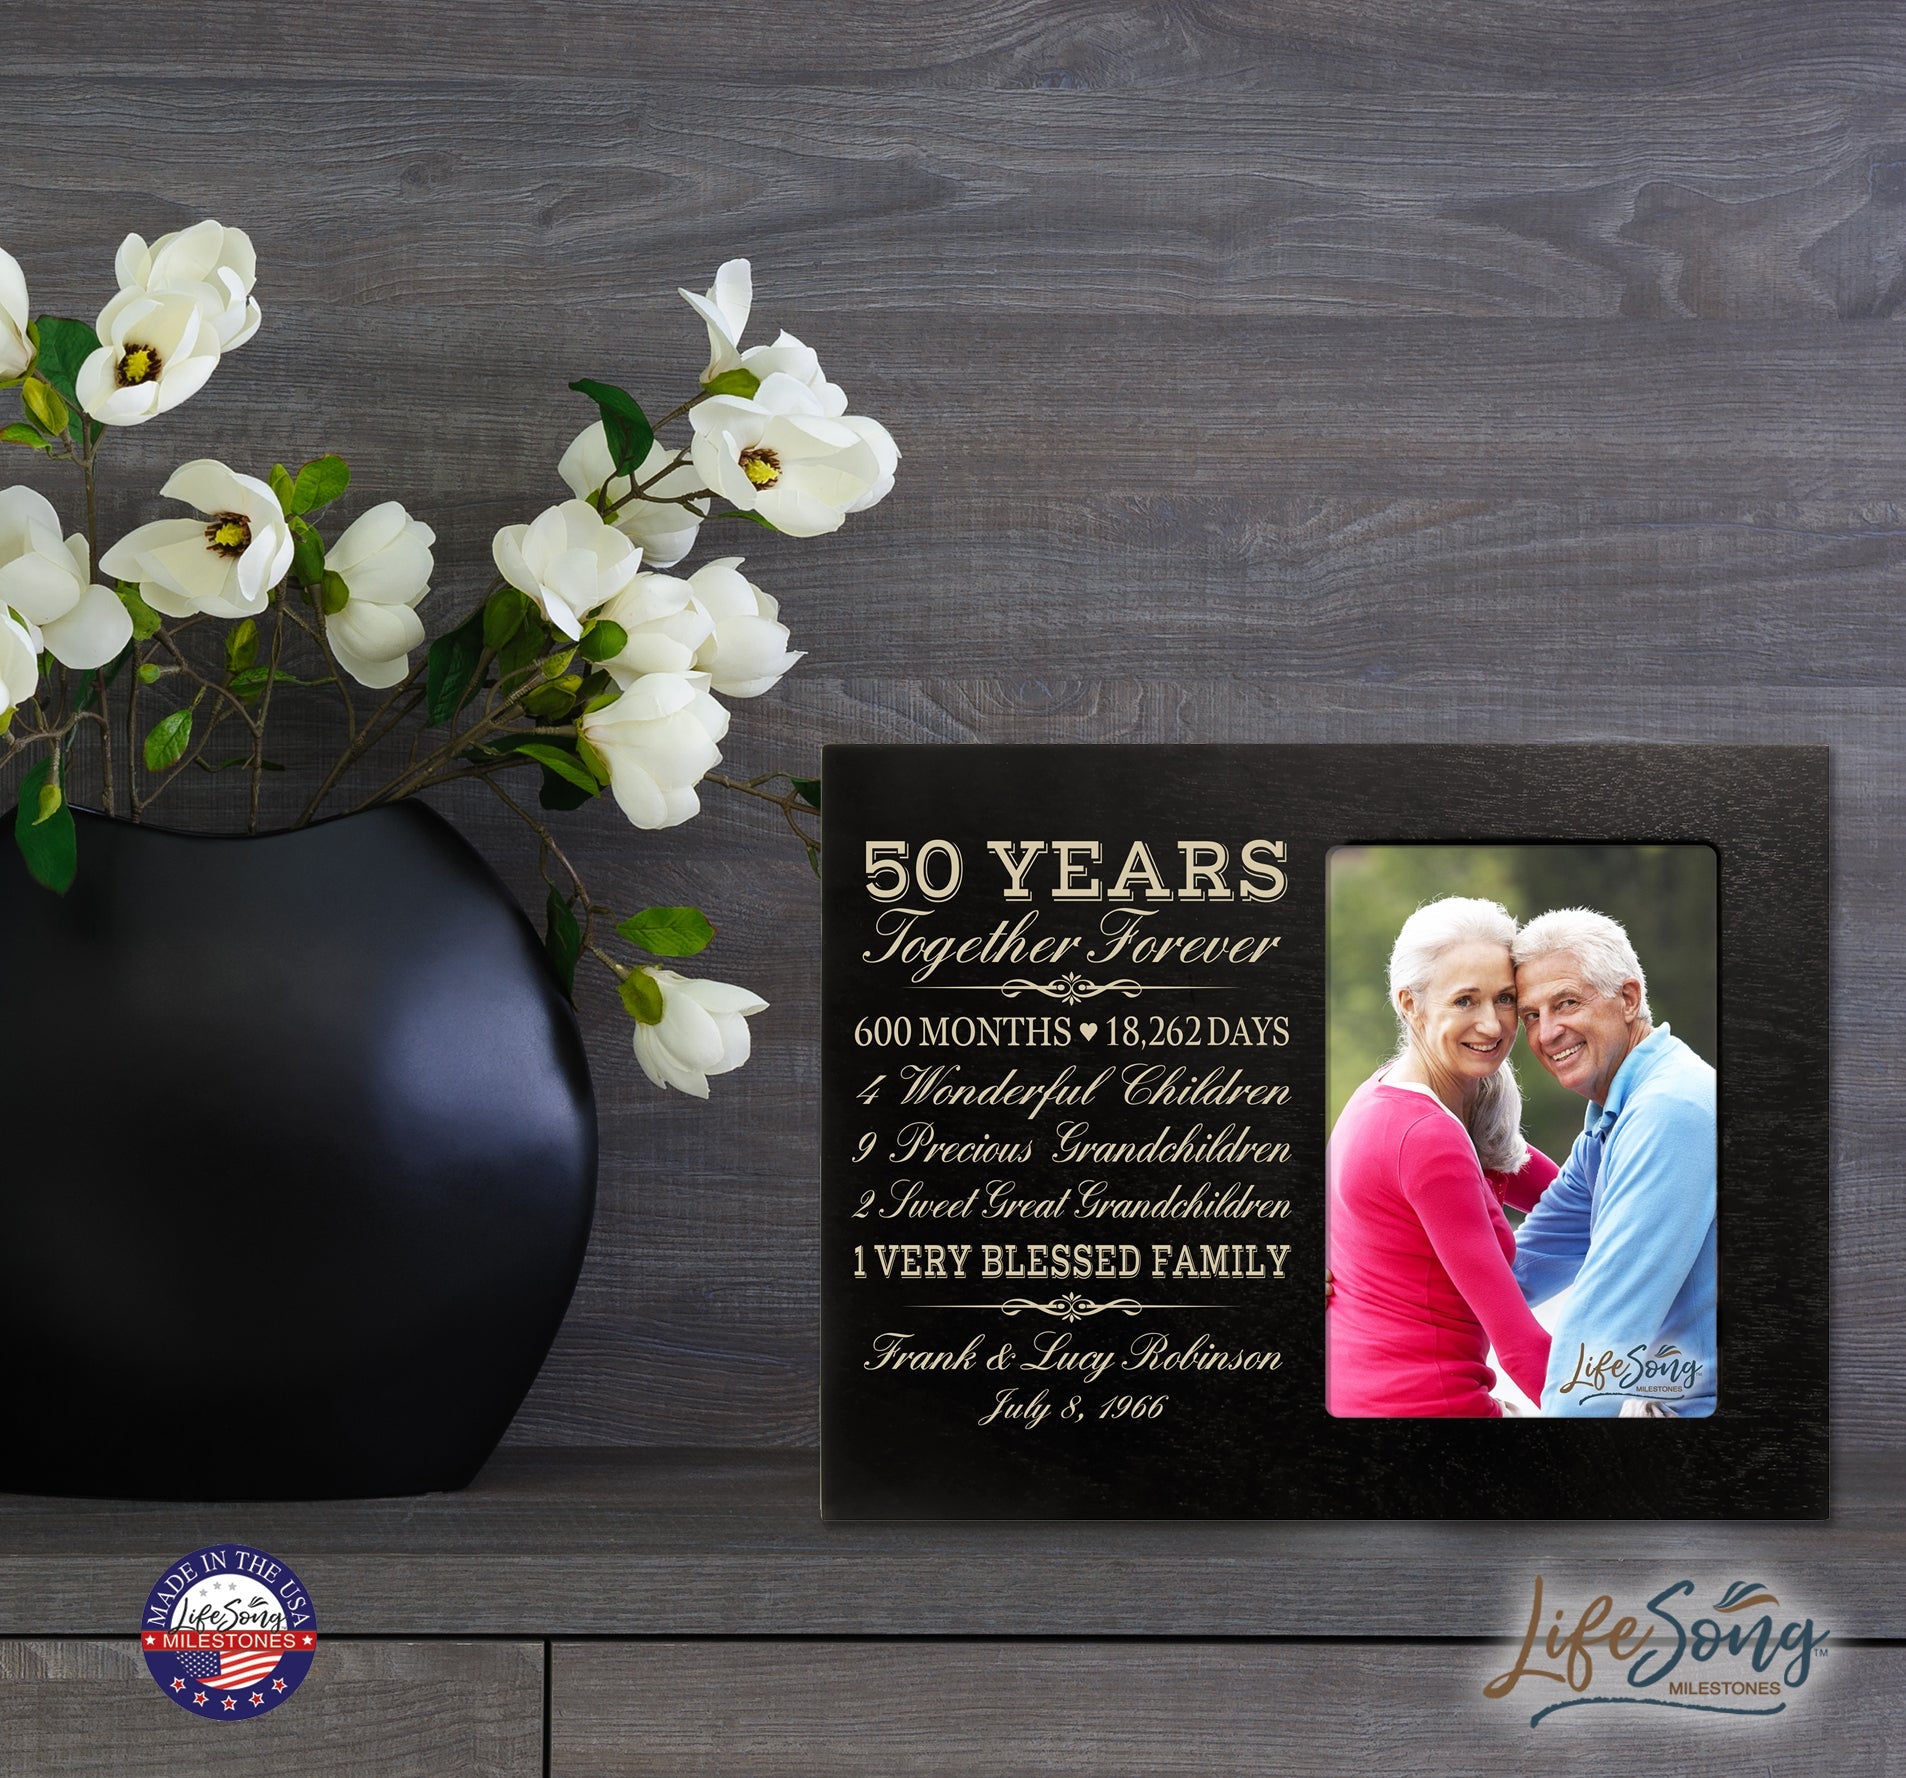 Lifesong Milestones Personalized Unique 50th Wedding Anniversary Picture Frame for Couples